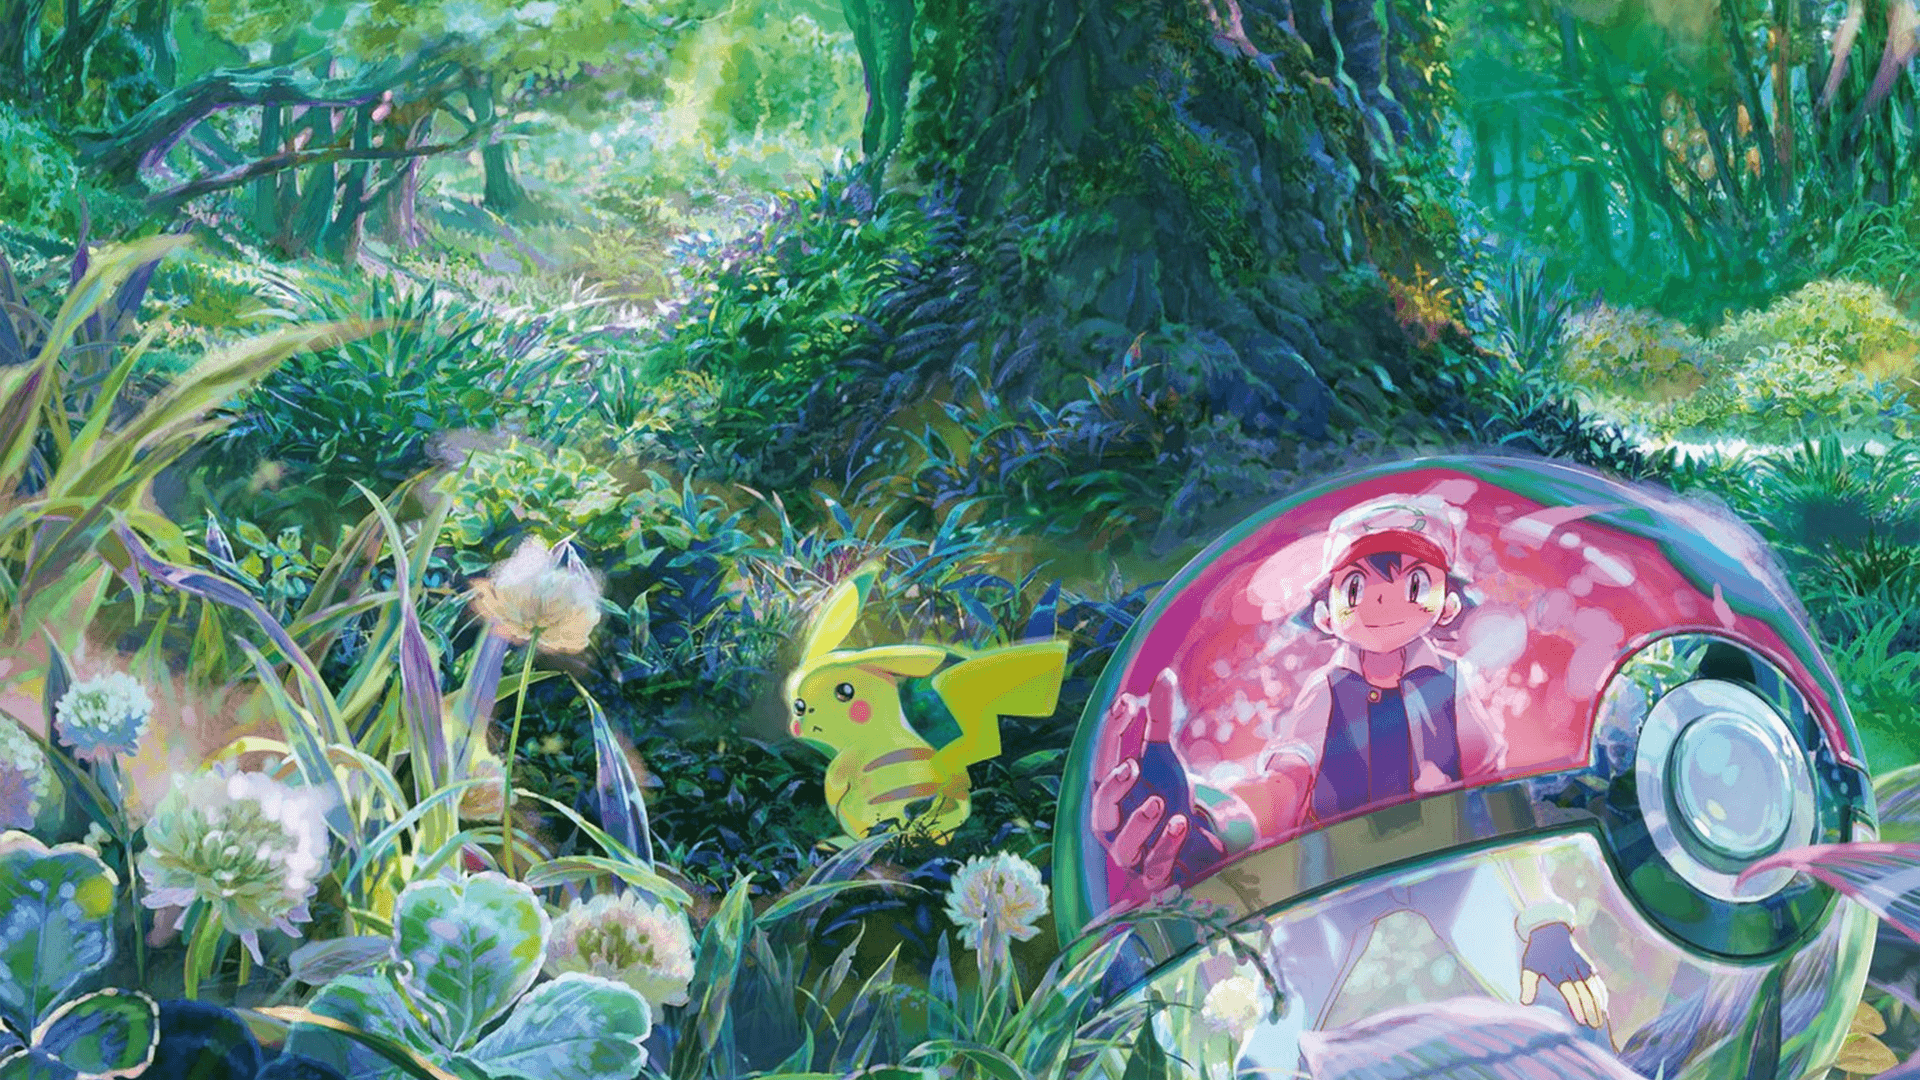 I made textless mobile and desktop wallpaper out of the Pokemon